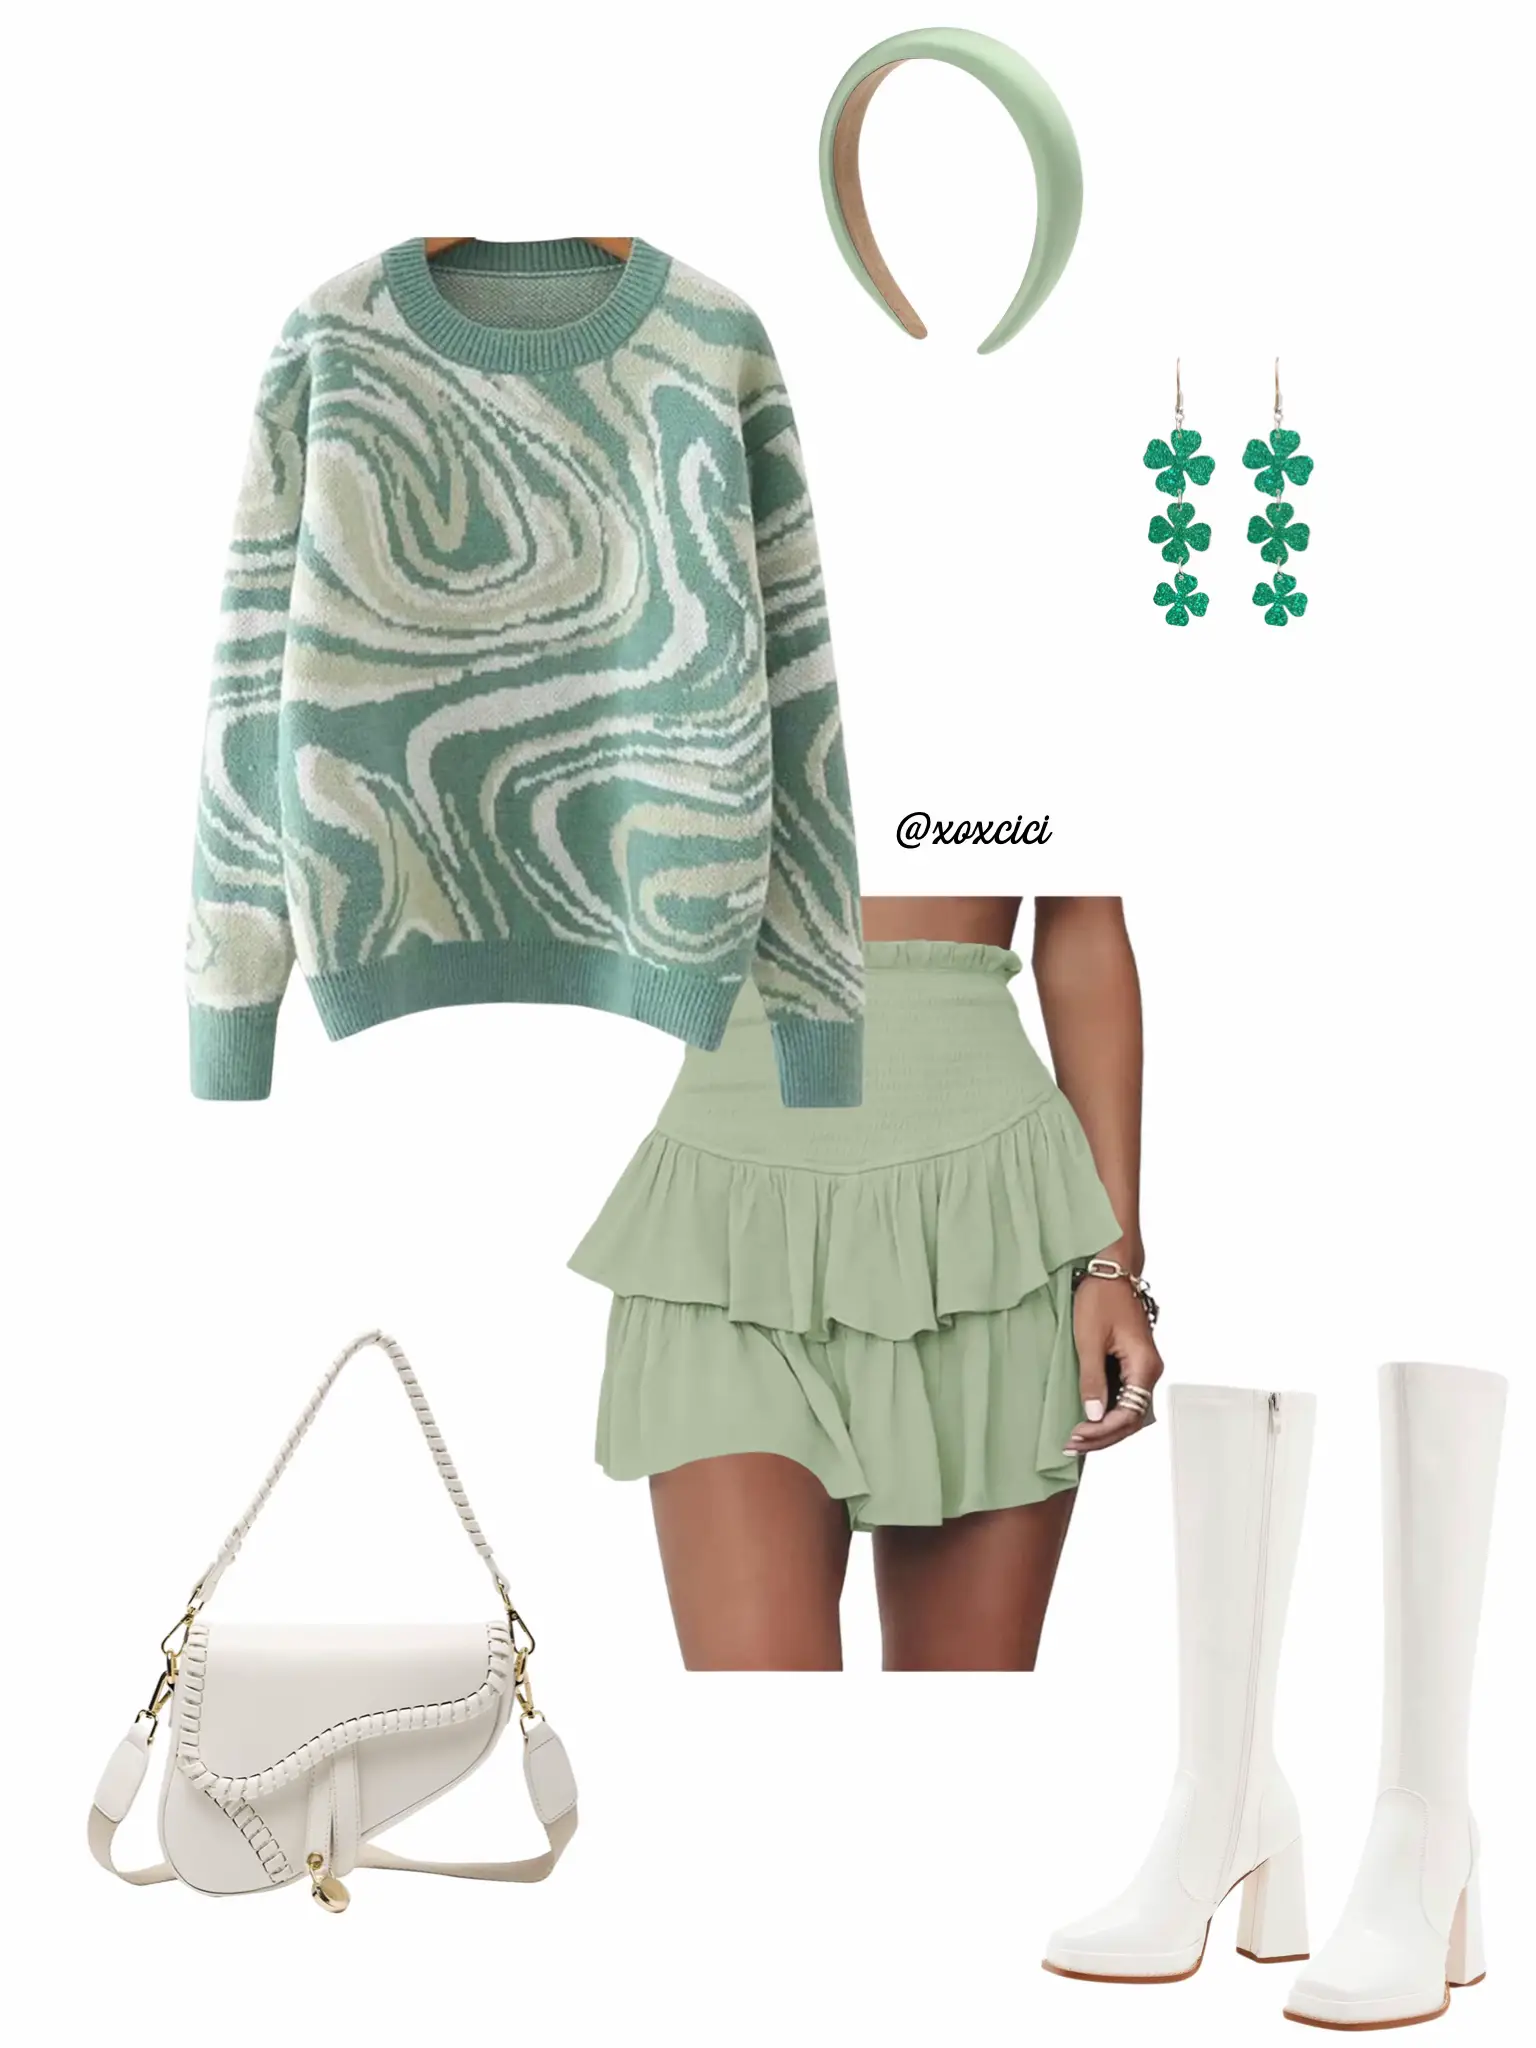 20 top Cute Outfits to Wear for St Patrick's Day for Teens ideas